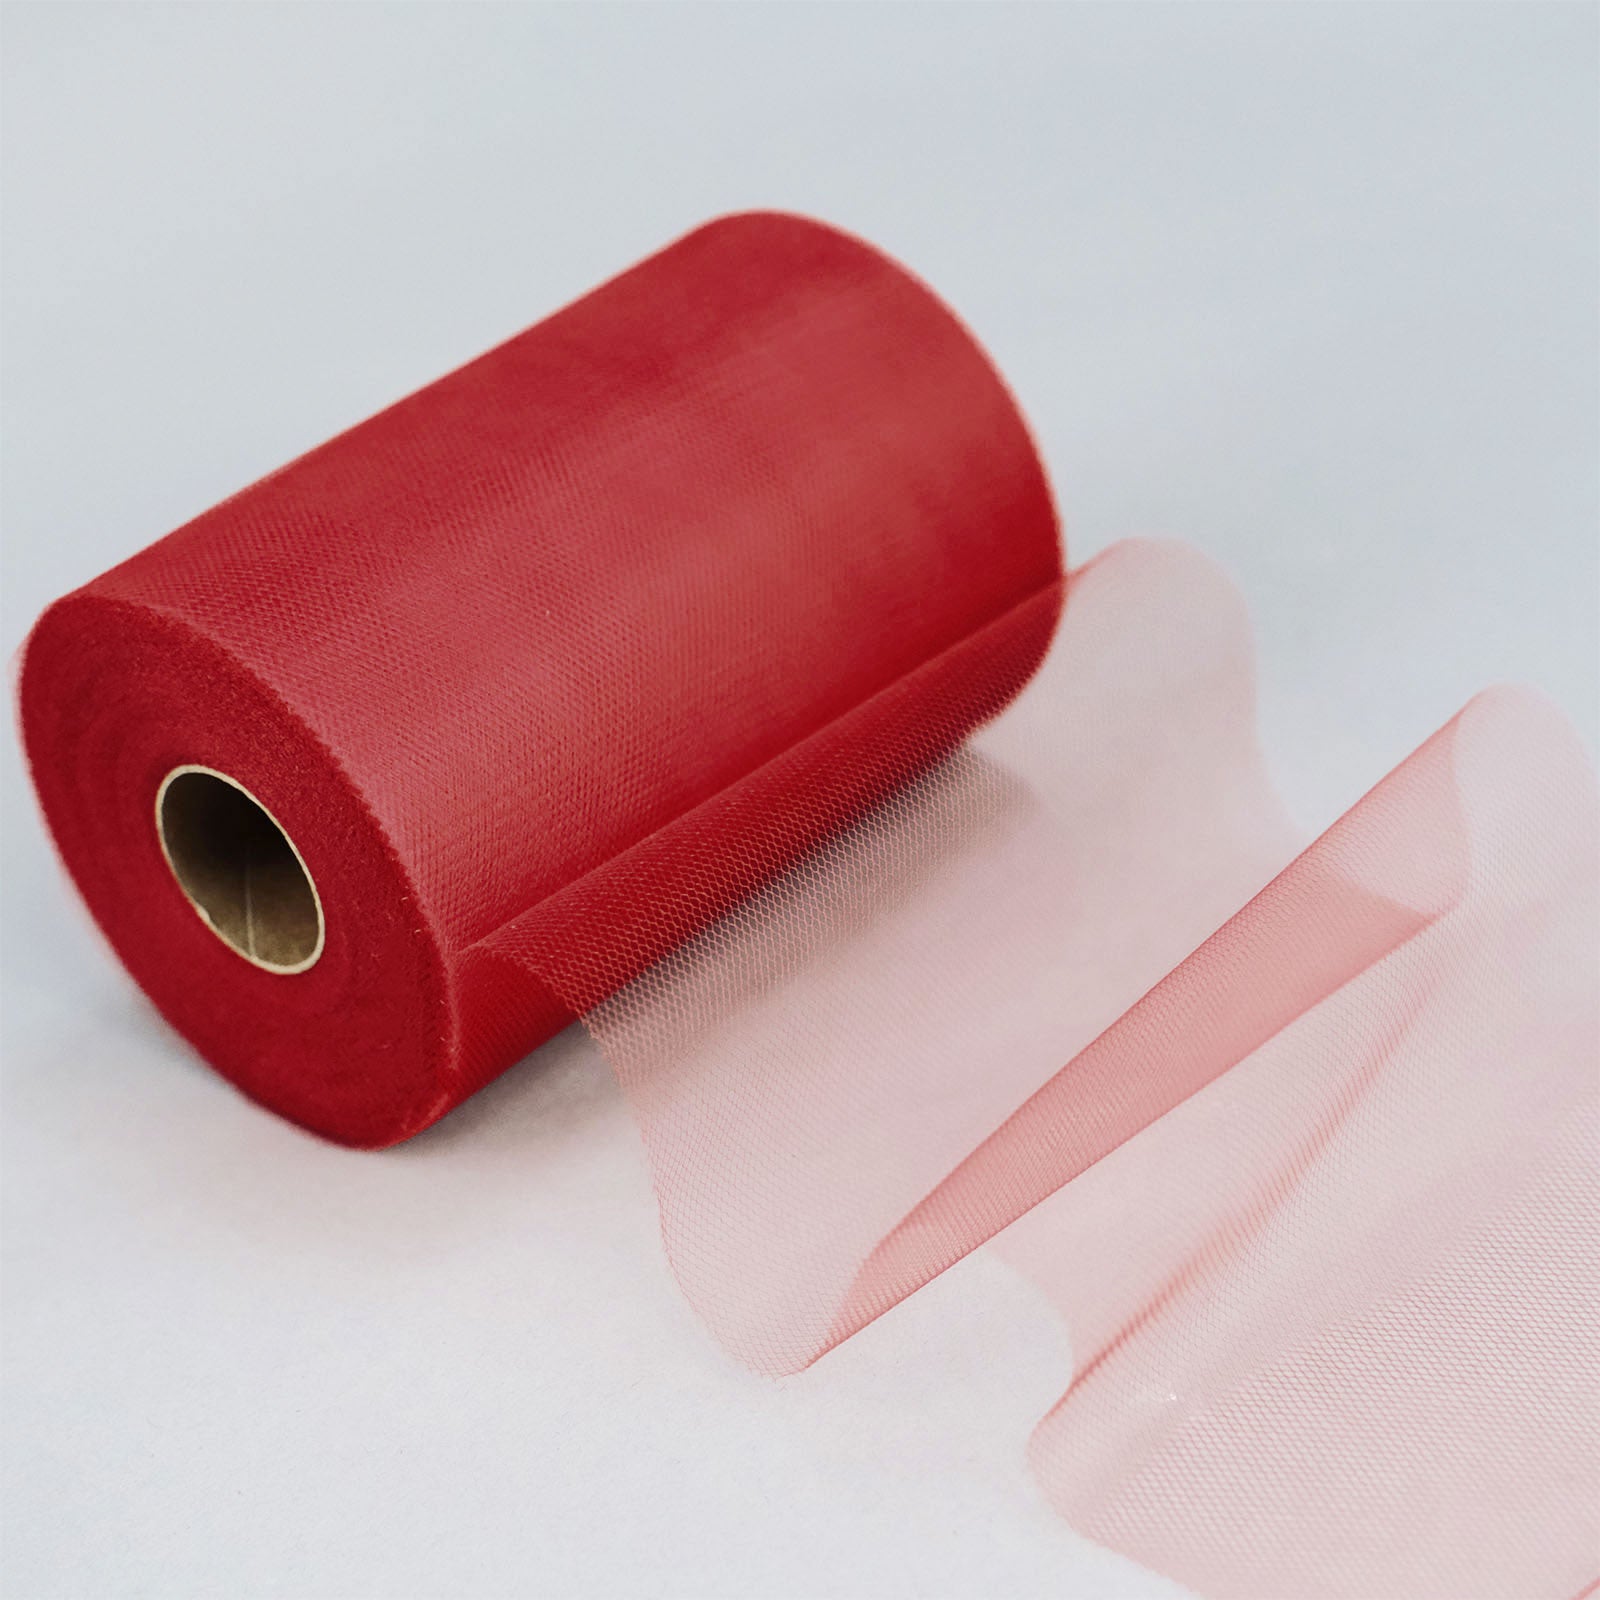 Tableclothsfactory 6 inch x 100 Yards Red Tulle Fabric Bolt